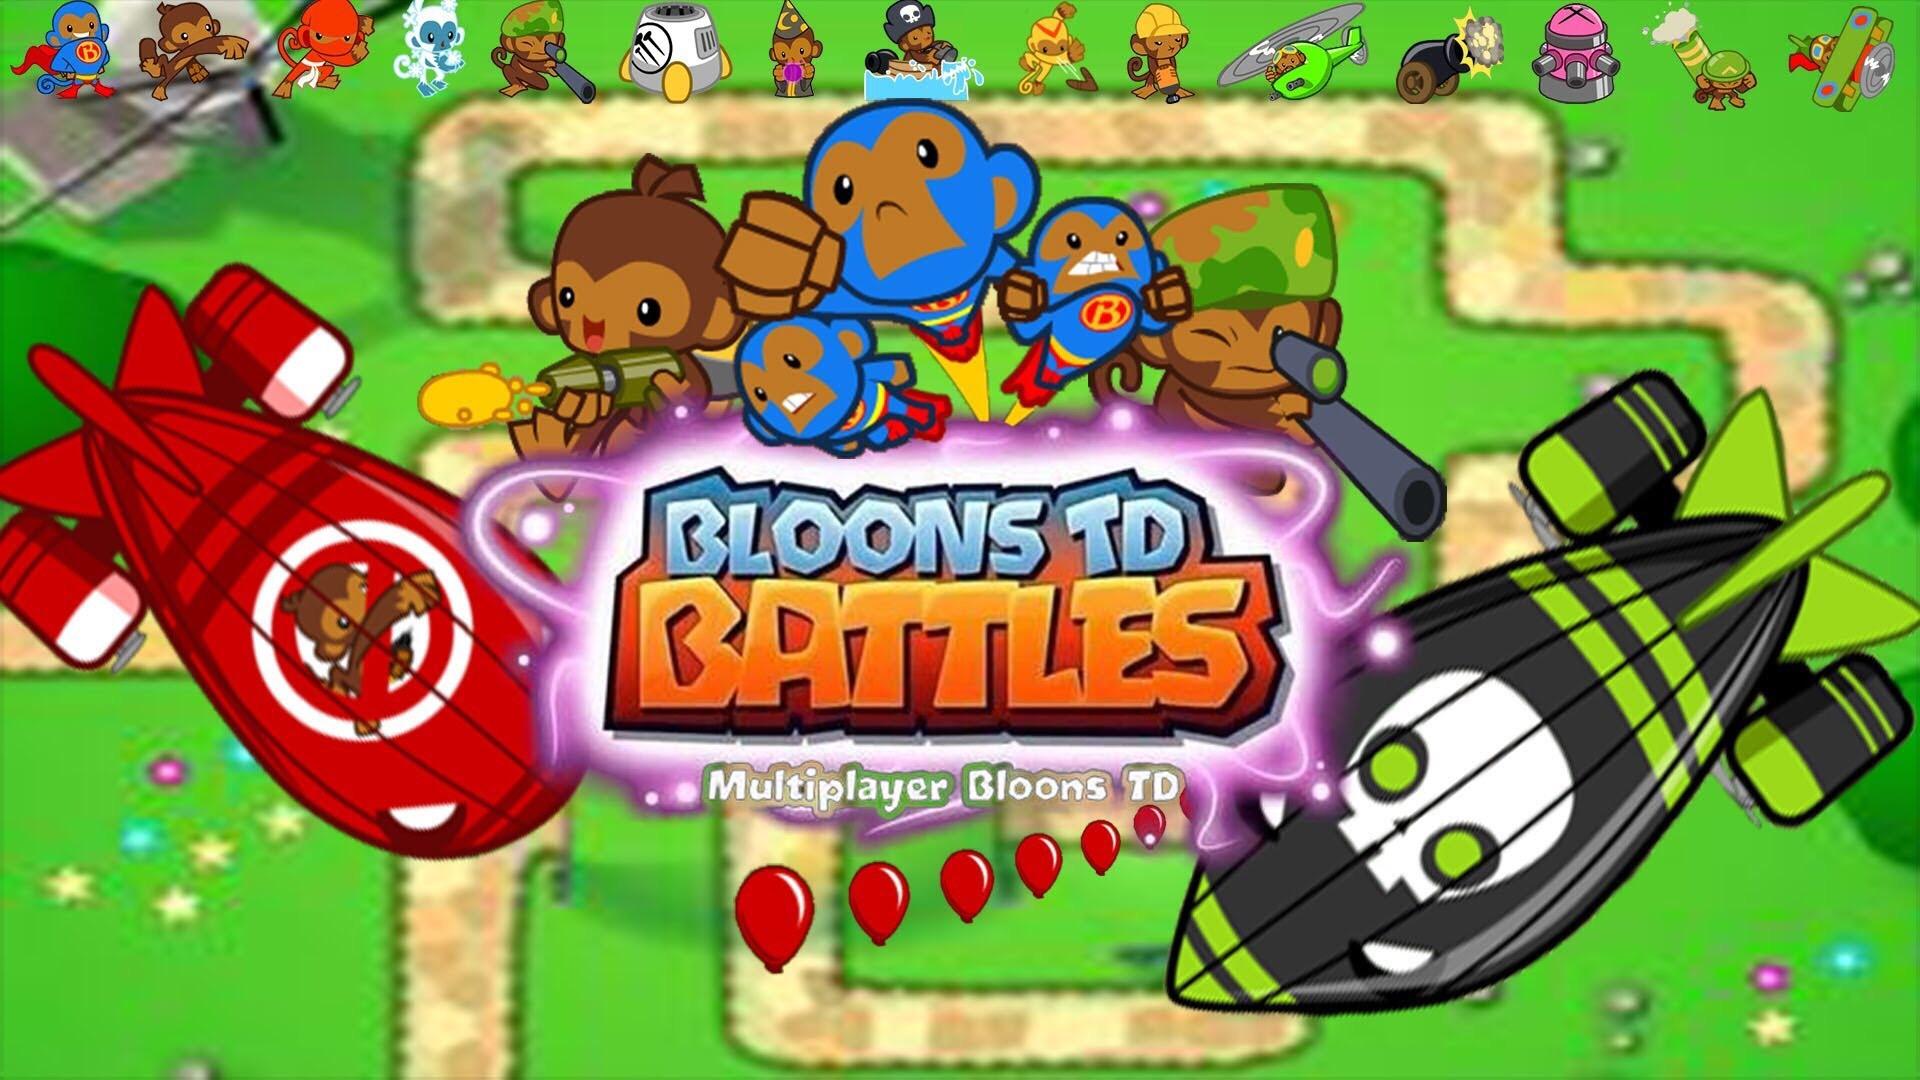 BTD Battles towers (late game) flashcards on Tinycards